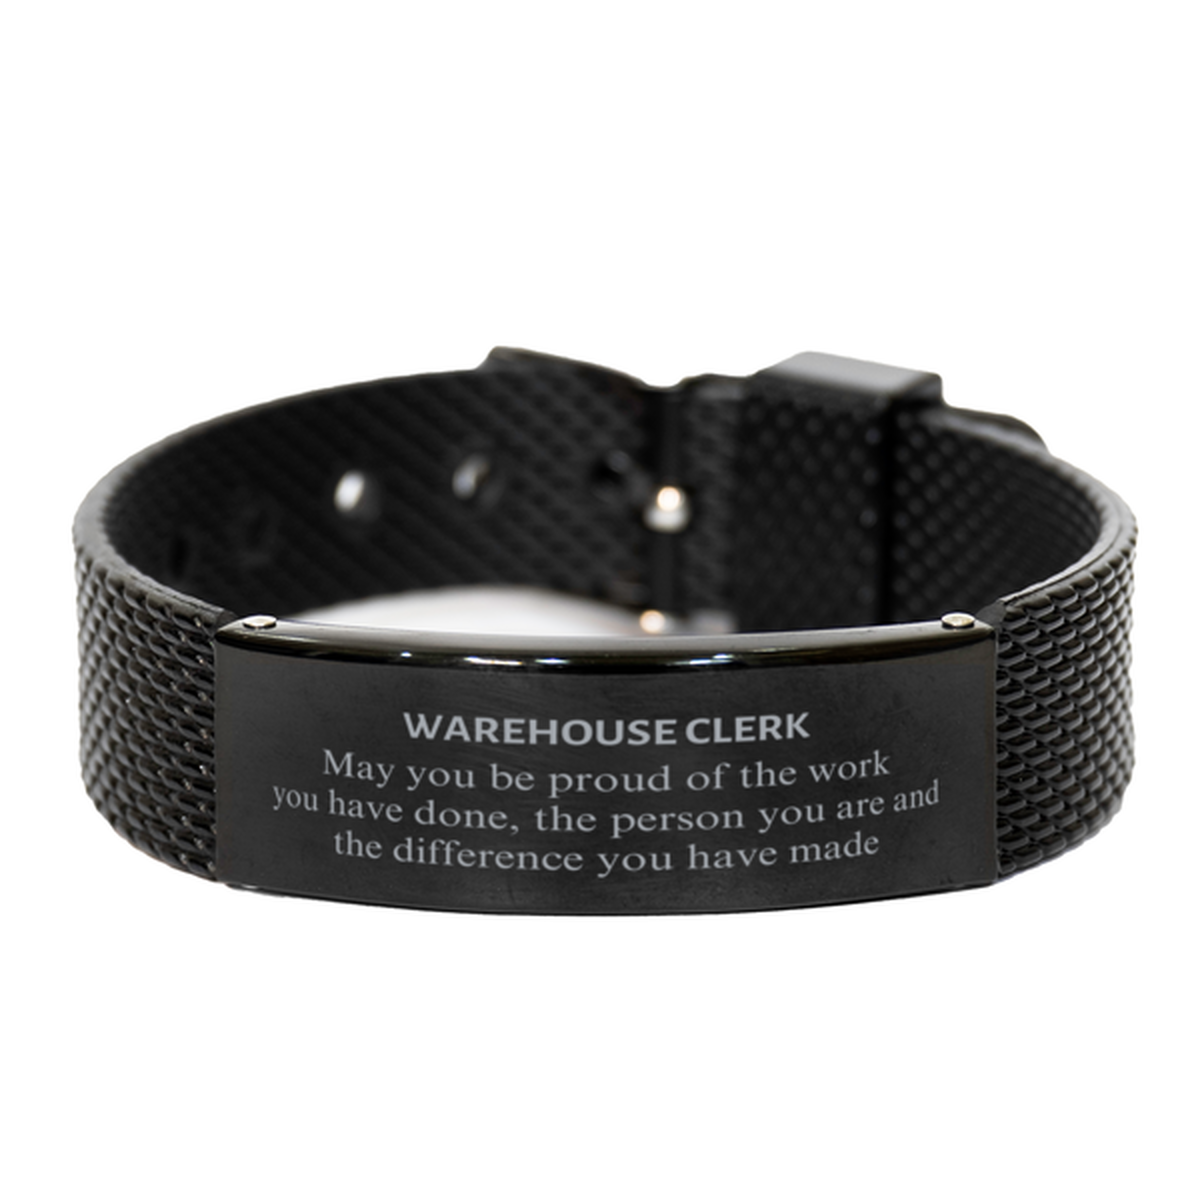 Warehouse Clerk May you be proud of the work you have done, Retirement Warehouse Clerk Black Shark Mesh Bracelet for Colleague Appreciation Gifts Amazing for Warehouse Clerk